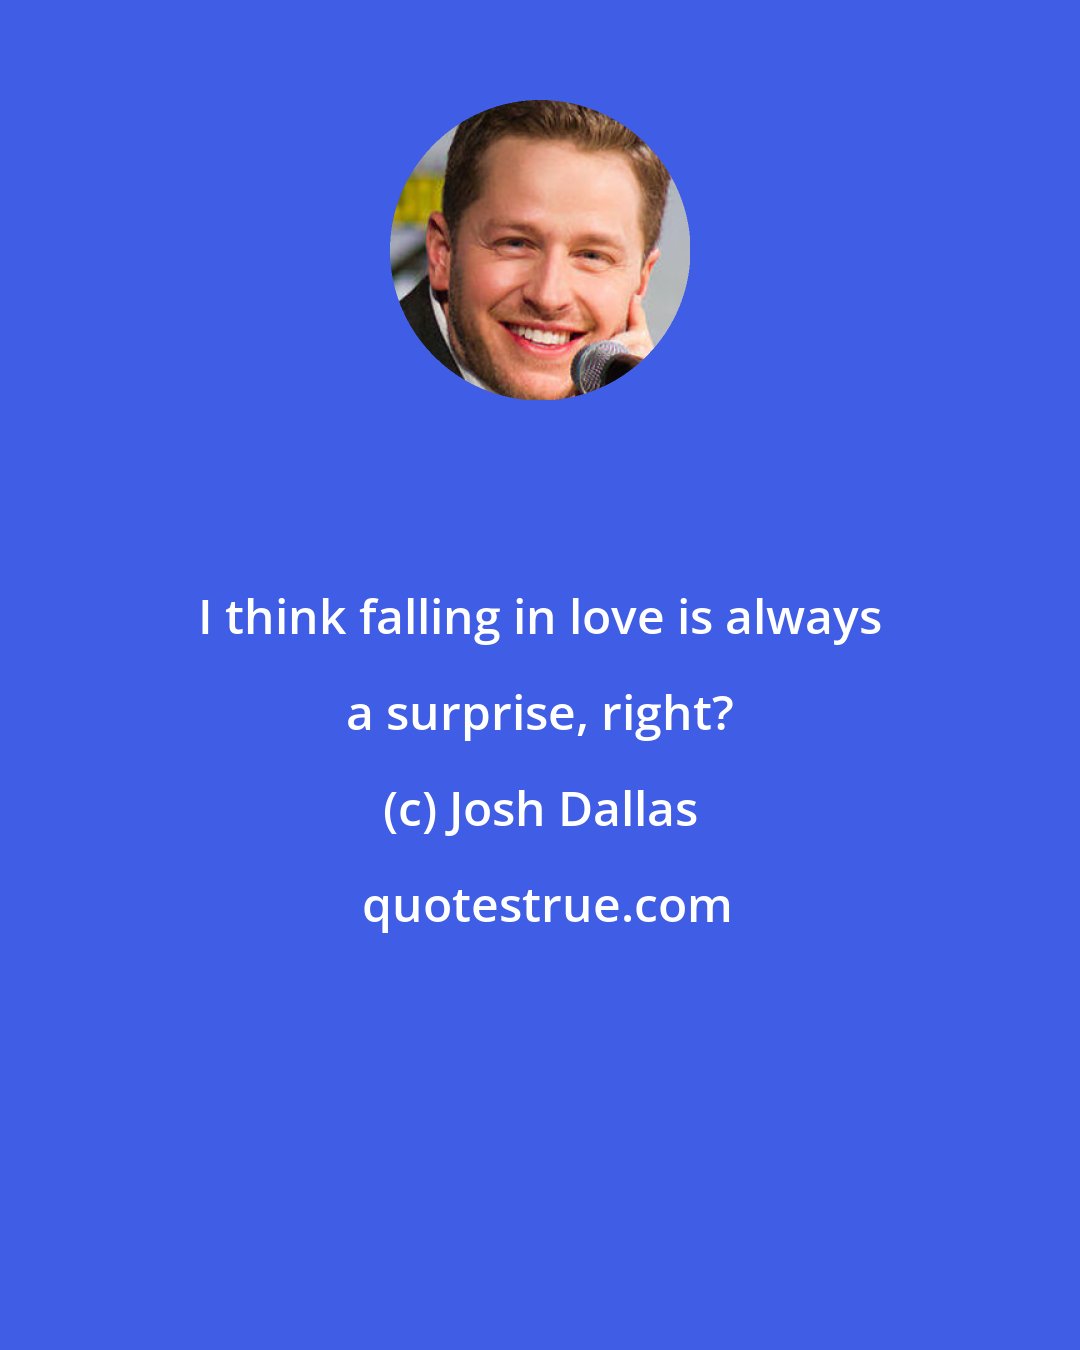 Josh Dallas: I think falling in love is always a surprise, right?